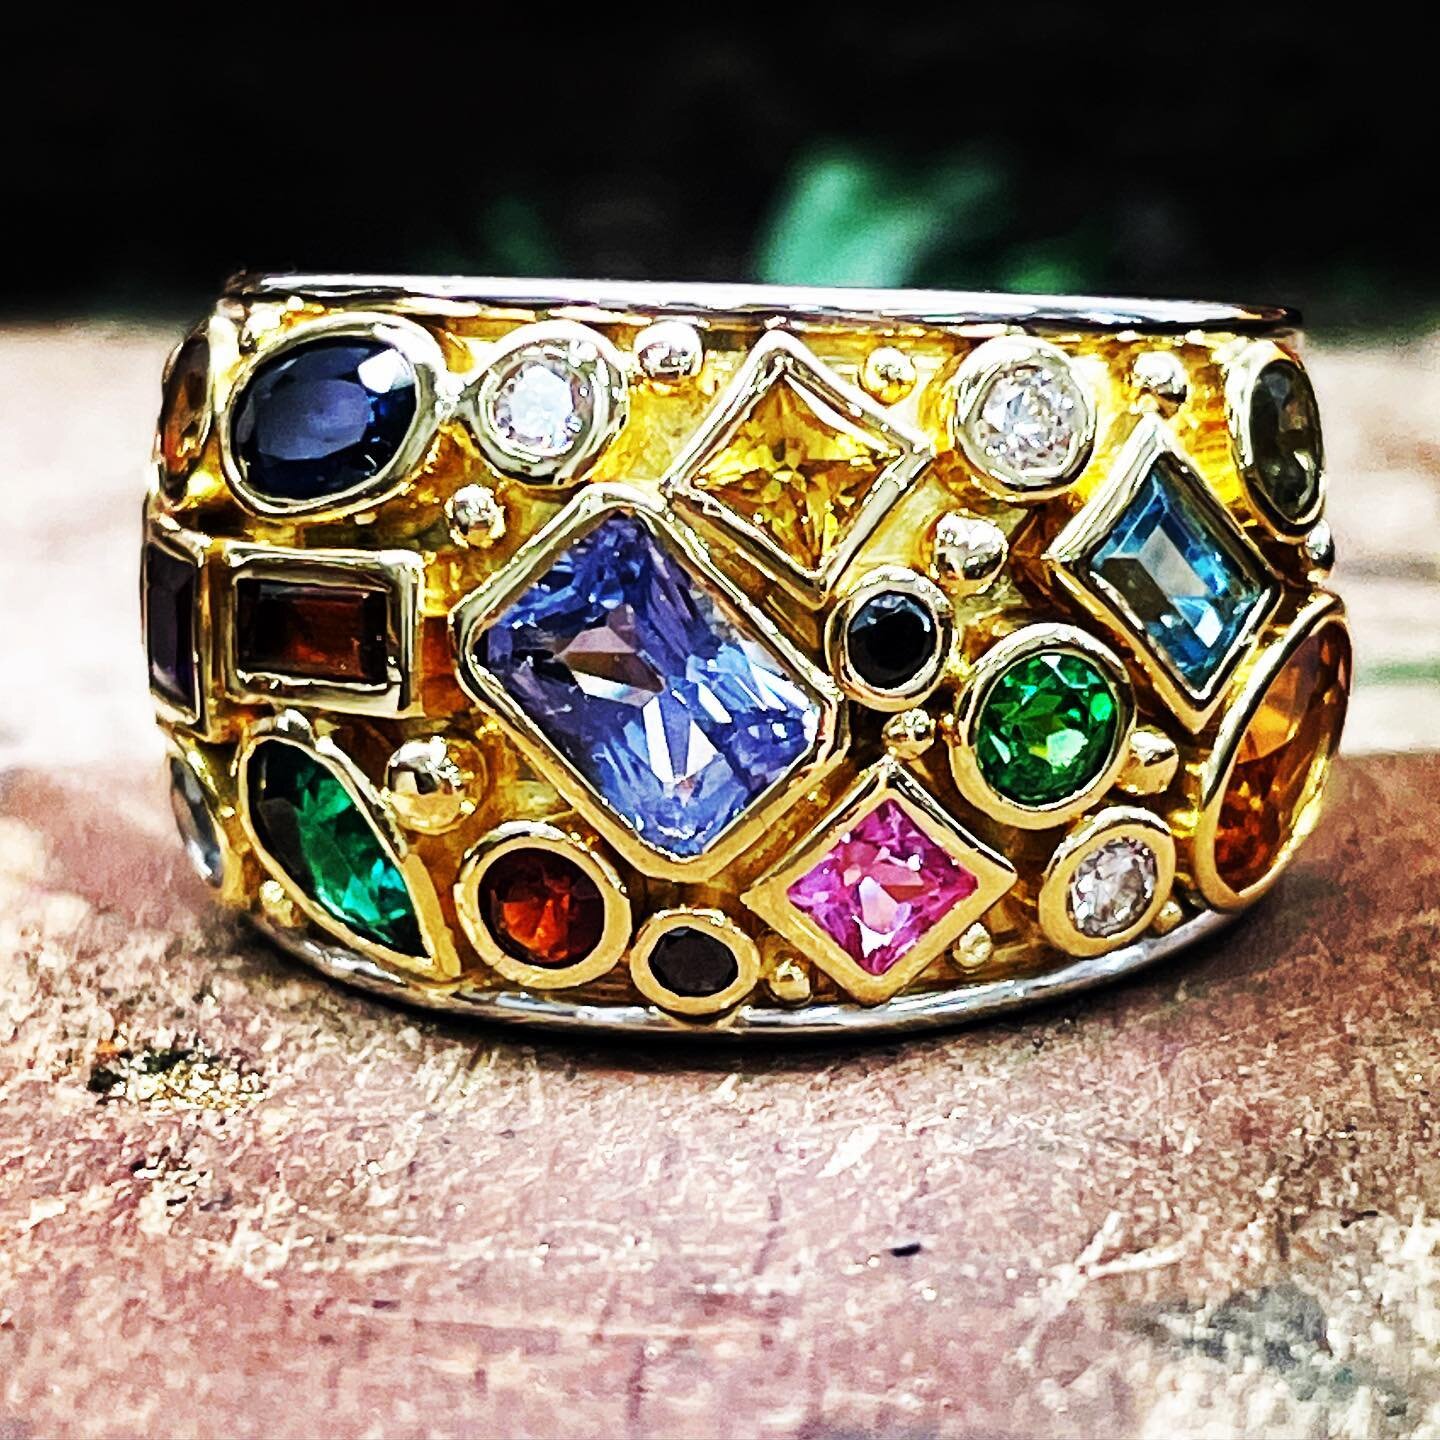 A clean and polish brought this gorgeous gem encrusted gold ring back to life!! Repair, refurbish and recycle and wear your old treasures #cleanandpolish #goldjewellery #northperth #recycle #repairs